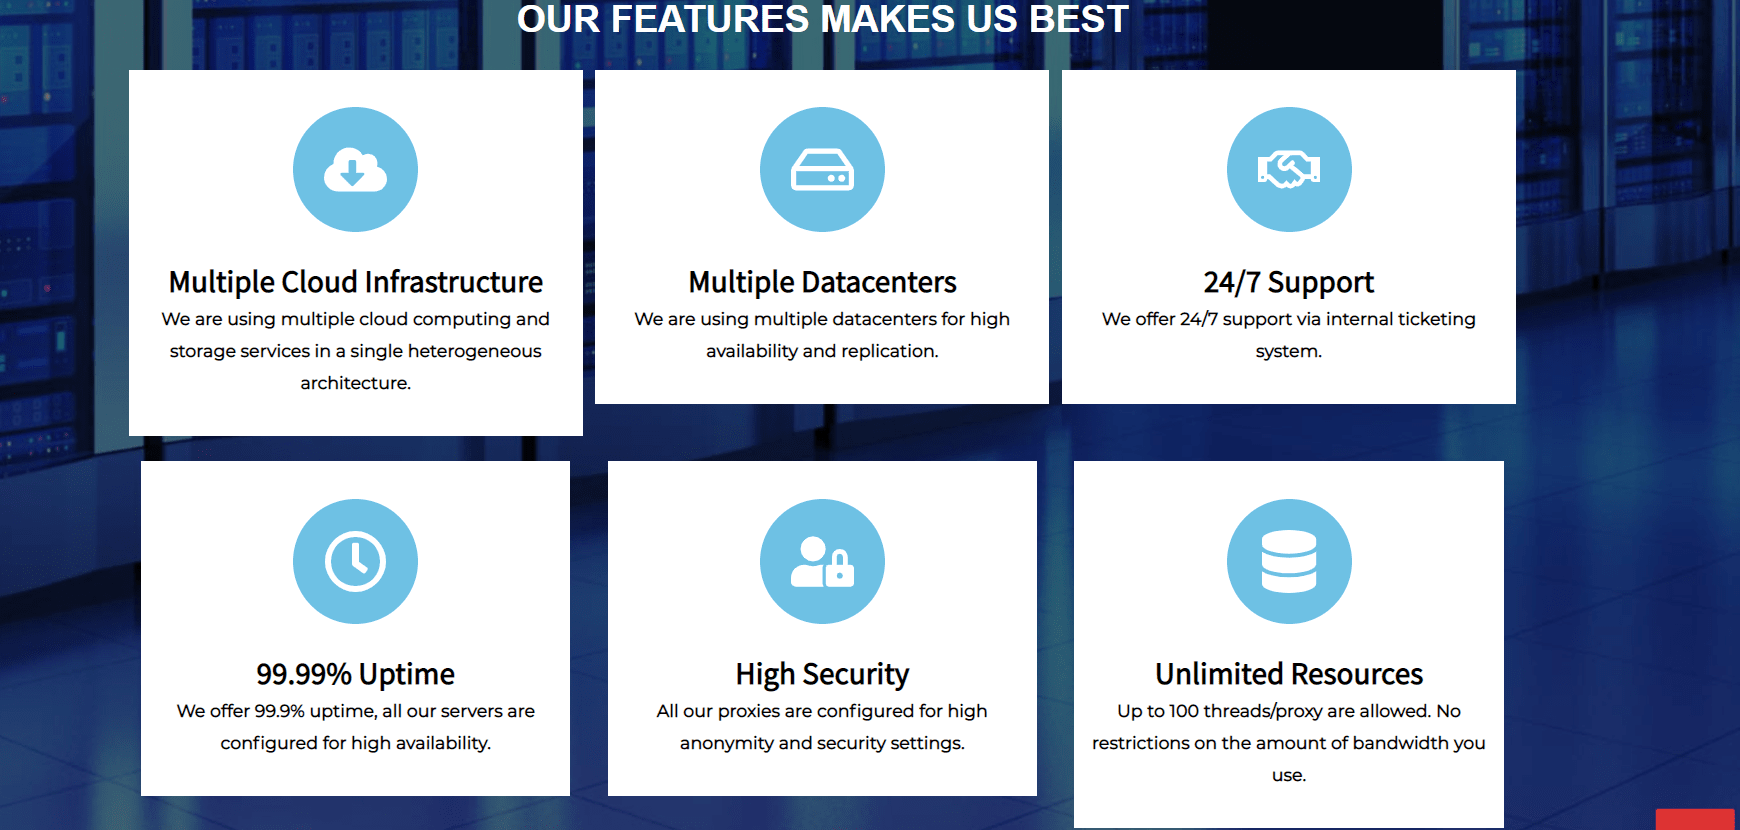 Hp features